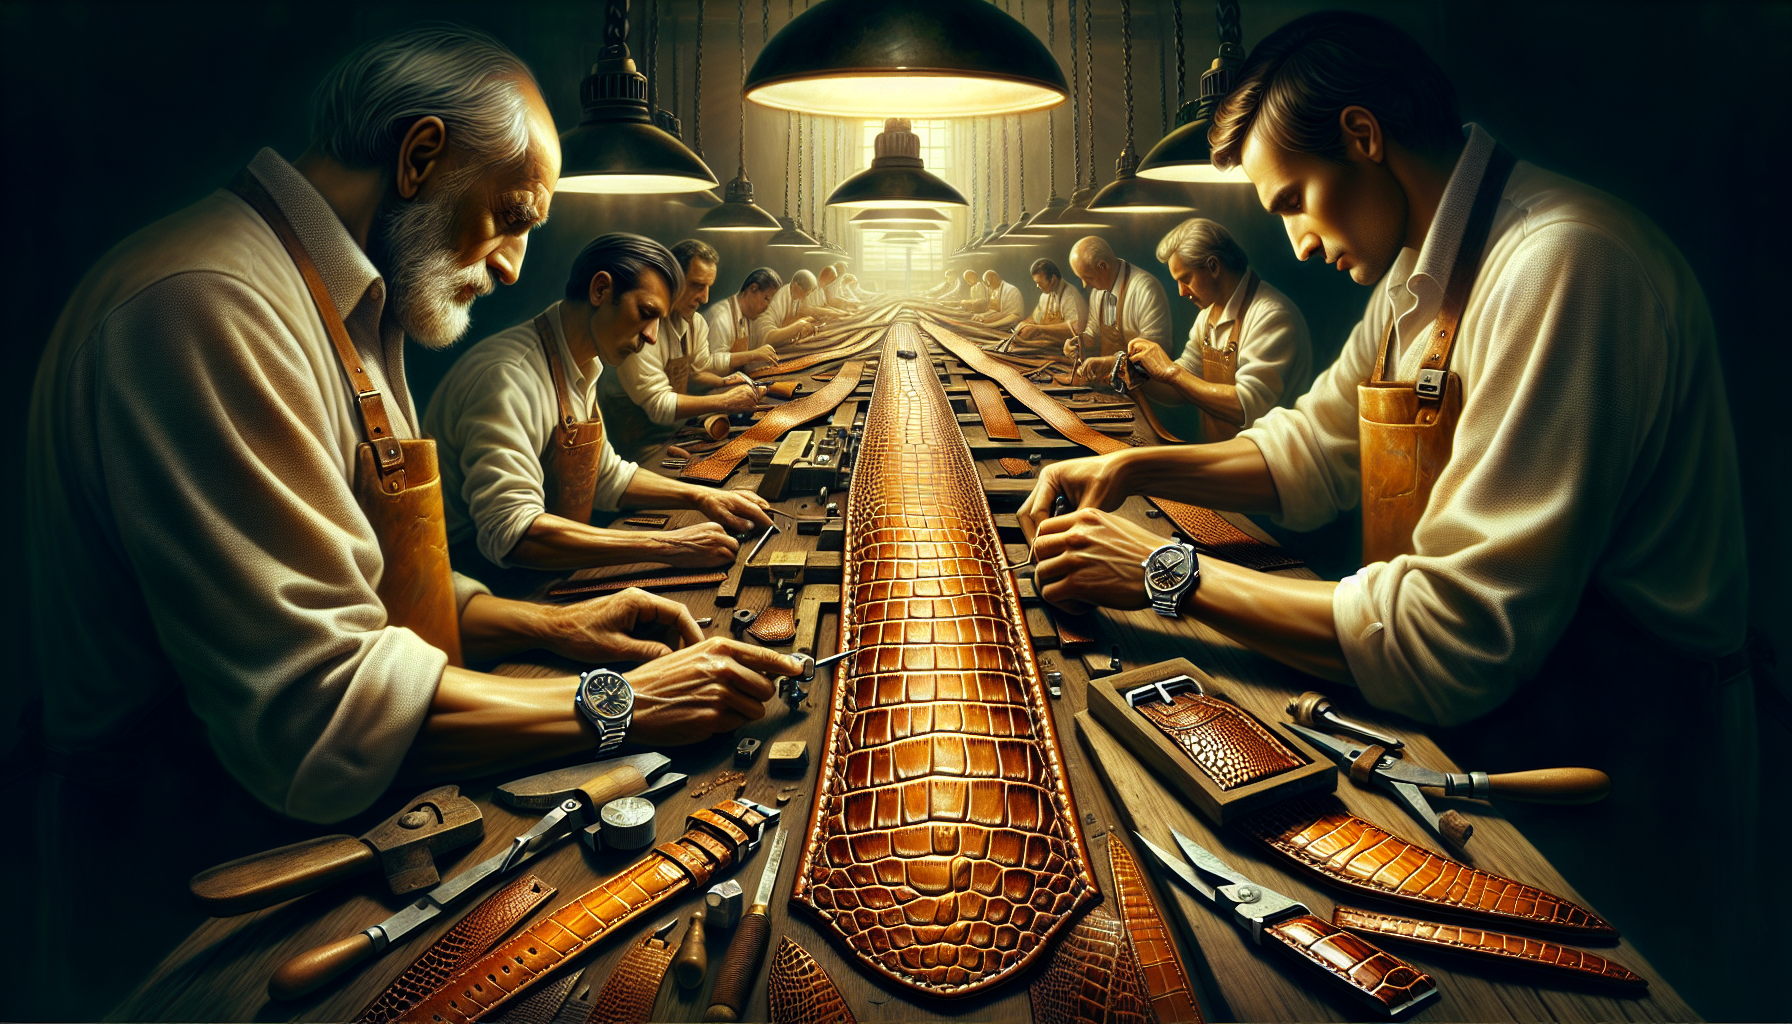 Artistic depiction of master artisans crafting crocodile watch straps